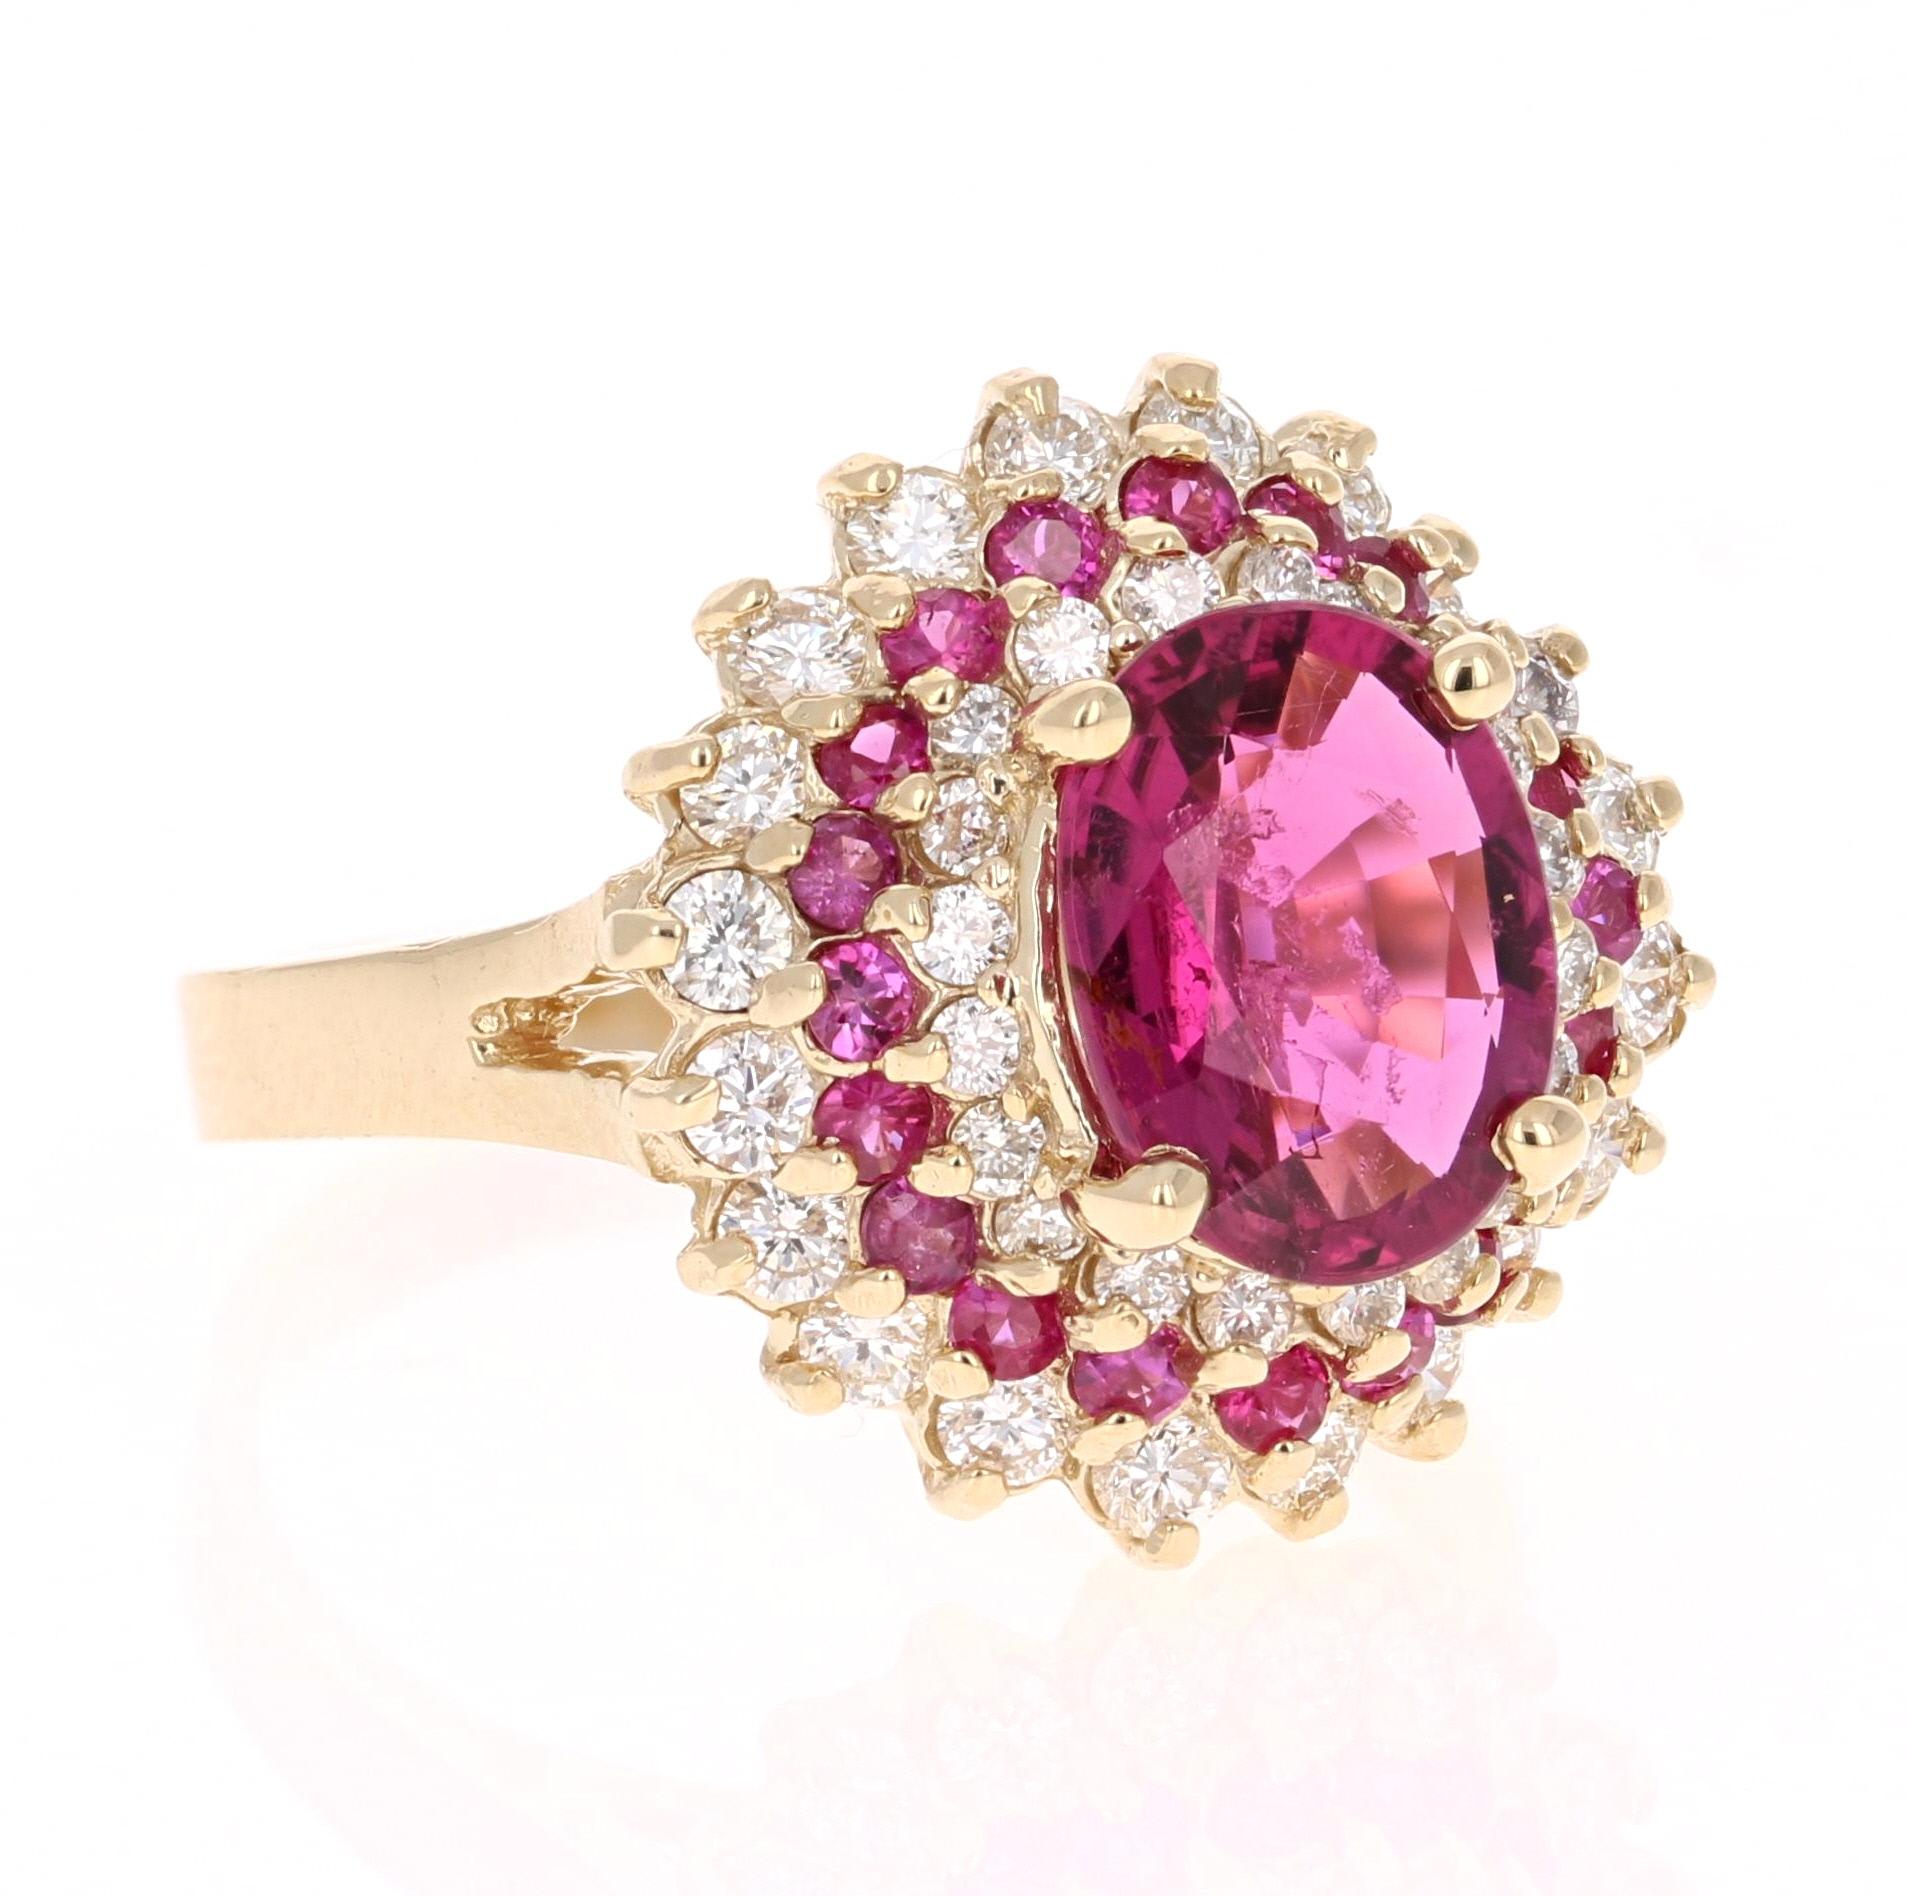 A colorful piece that is sure to elevate your accessory wardrobe!  

This beauty has an Oval Cut Pink Tourmaline set in the center of the ring that weighs 1.79 carats.  It is surrounded by 20 Round Cut Pink Sapphires that weigh 0.44 carats and 40